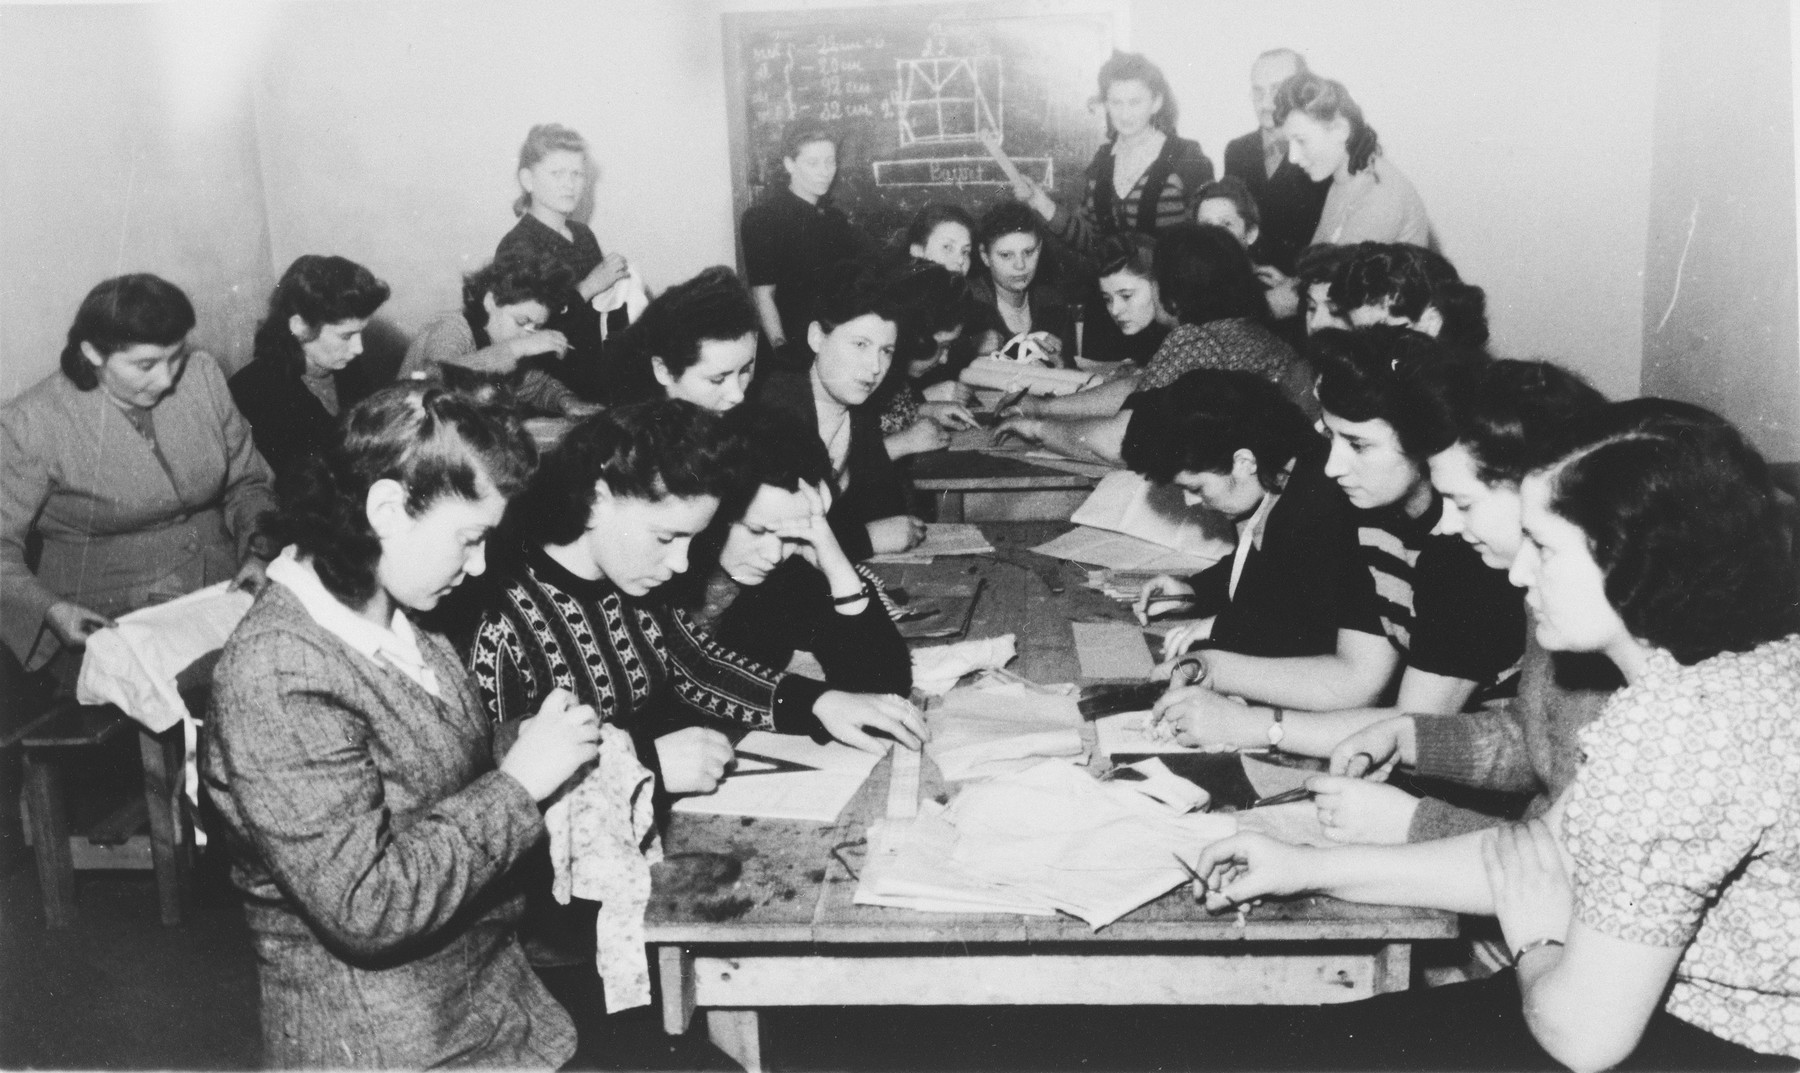 Women do hand sewing in an ORT vocational school in the Zeilsheim displaced persons' camp.

Among those pictured is Fayga Galas, on the left with her hand raised.